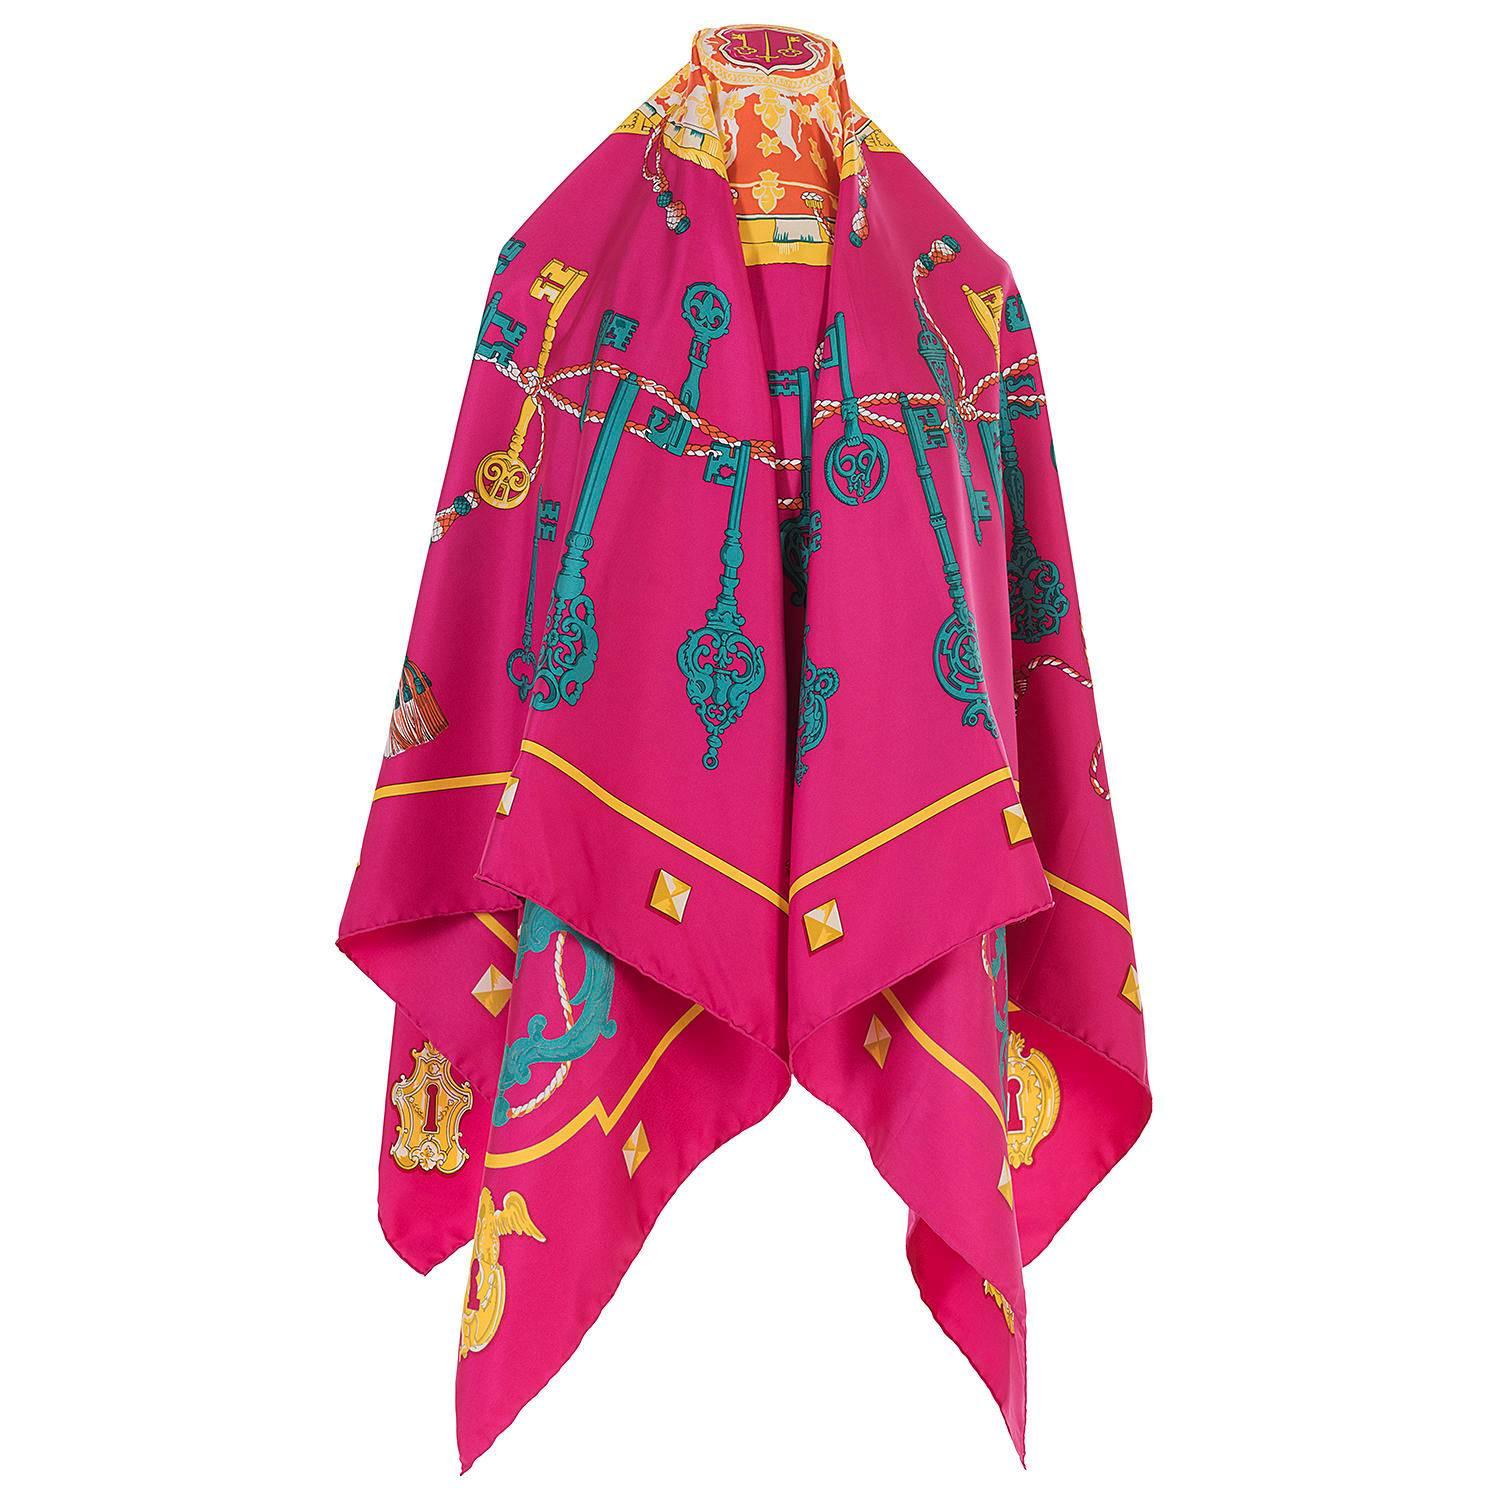 Stunning Hermes 140cm Silk Shawl Scarf 'Les Clefs' by Caty Latham For Sale